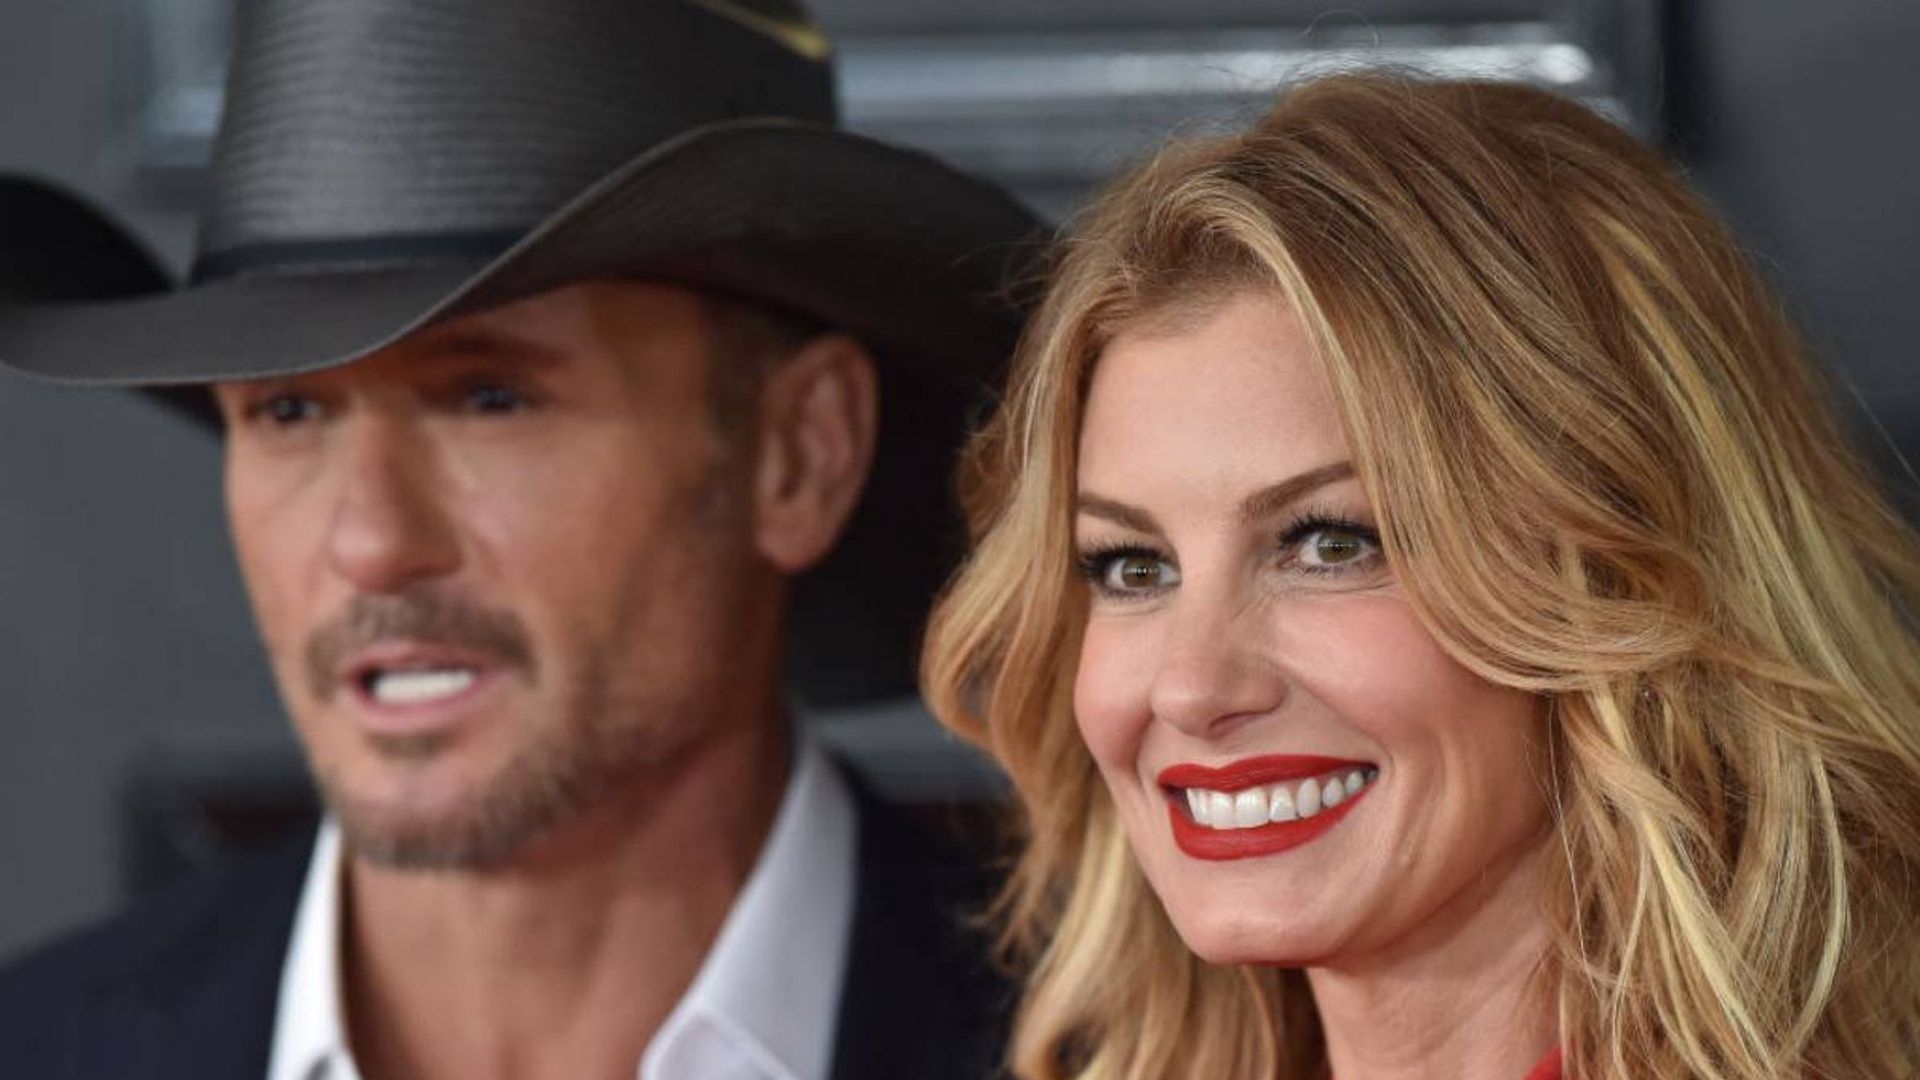 FAith Hill and Tim McGraw look stylish at red carpet event 